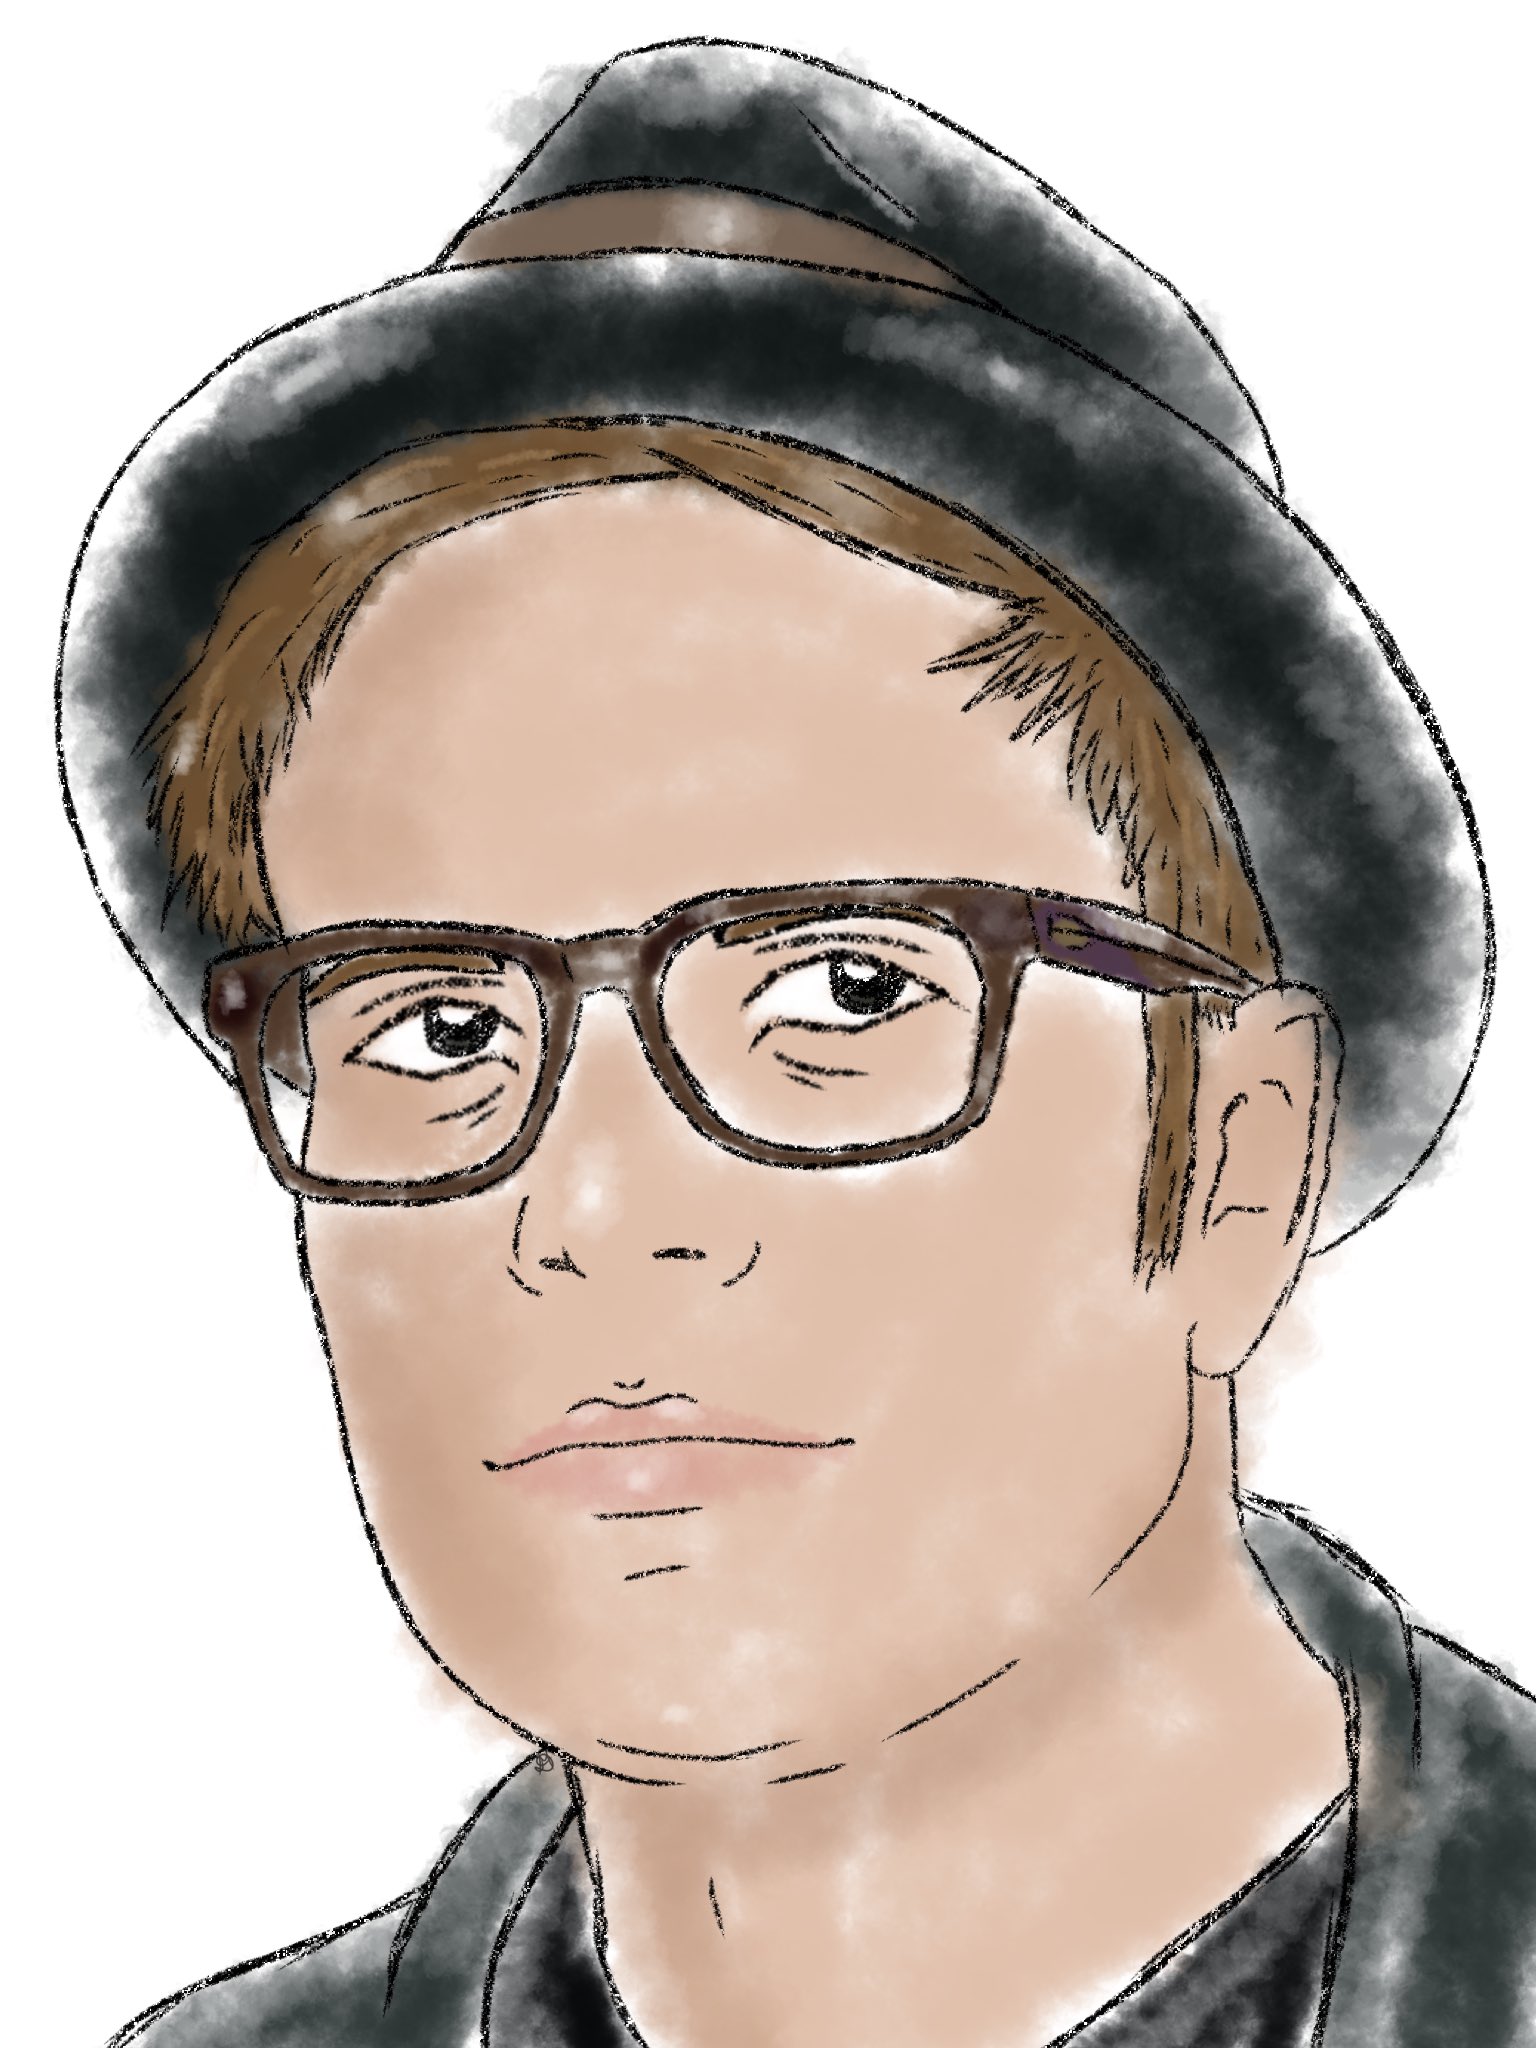 Happy Birthday to The Guy himself, Patrick Stump! I hope you have an awesome day!! 